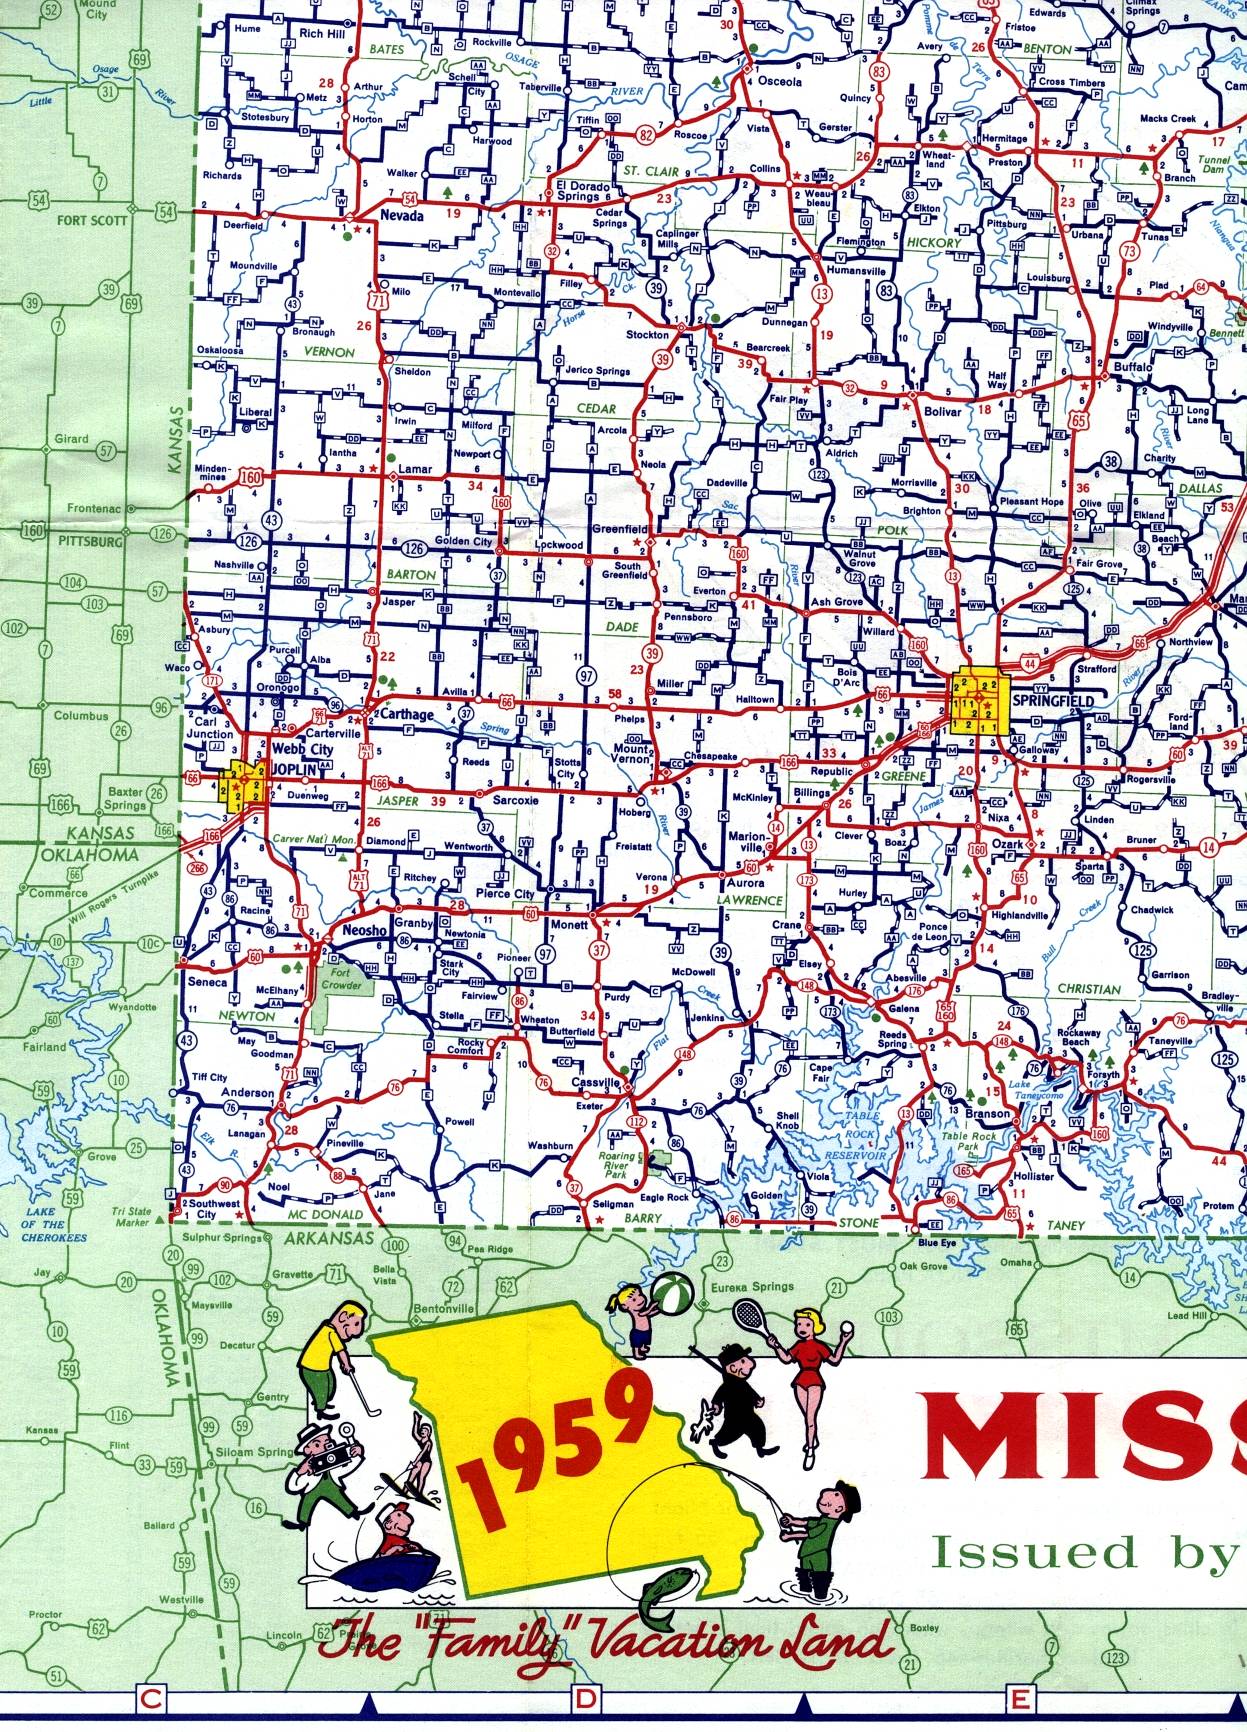 Southwest corner of Missouri from 1959 official highway map